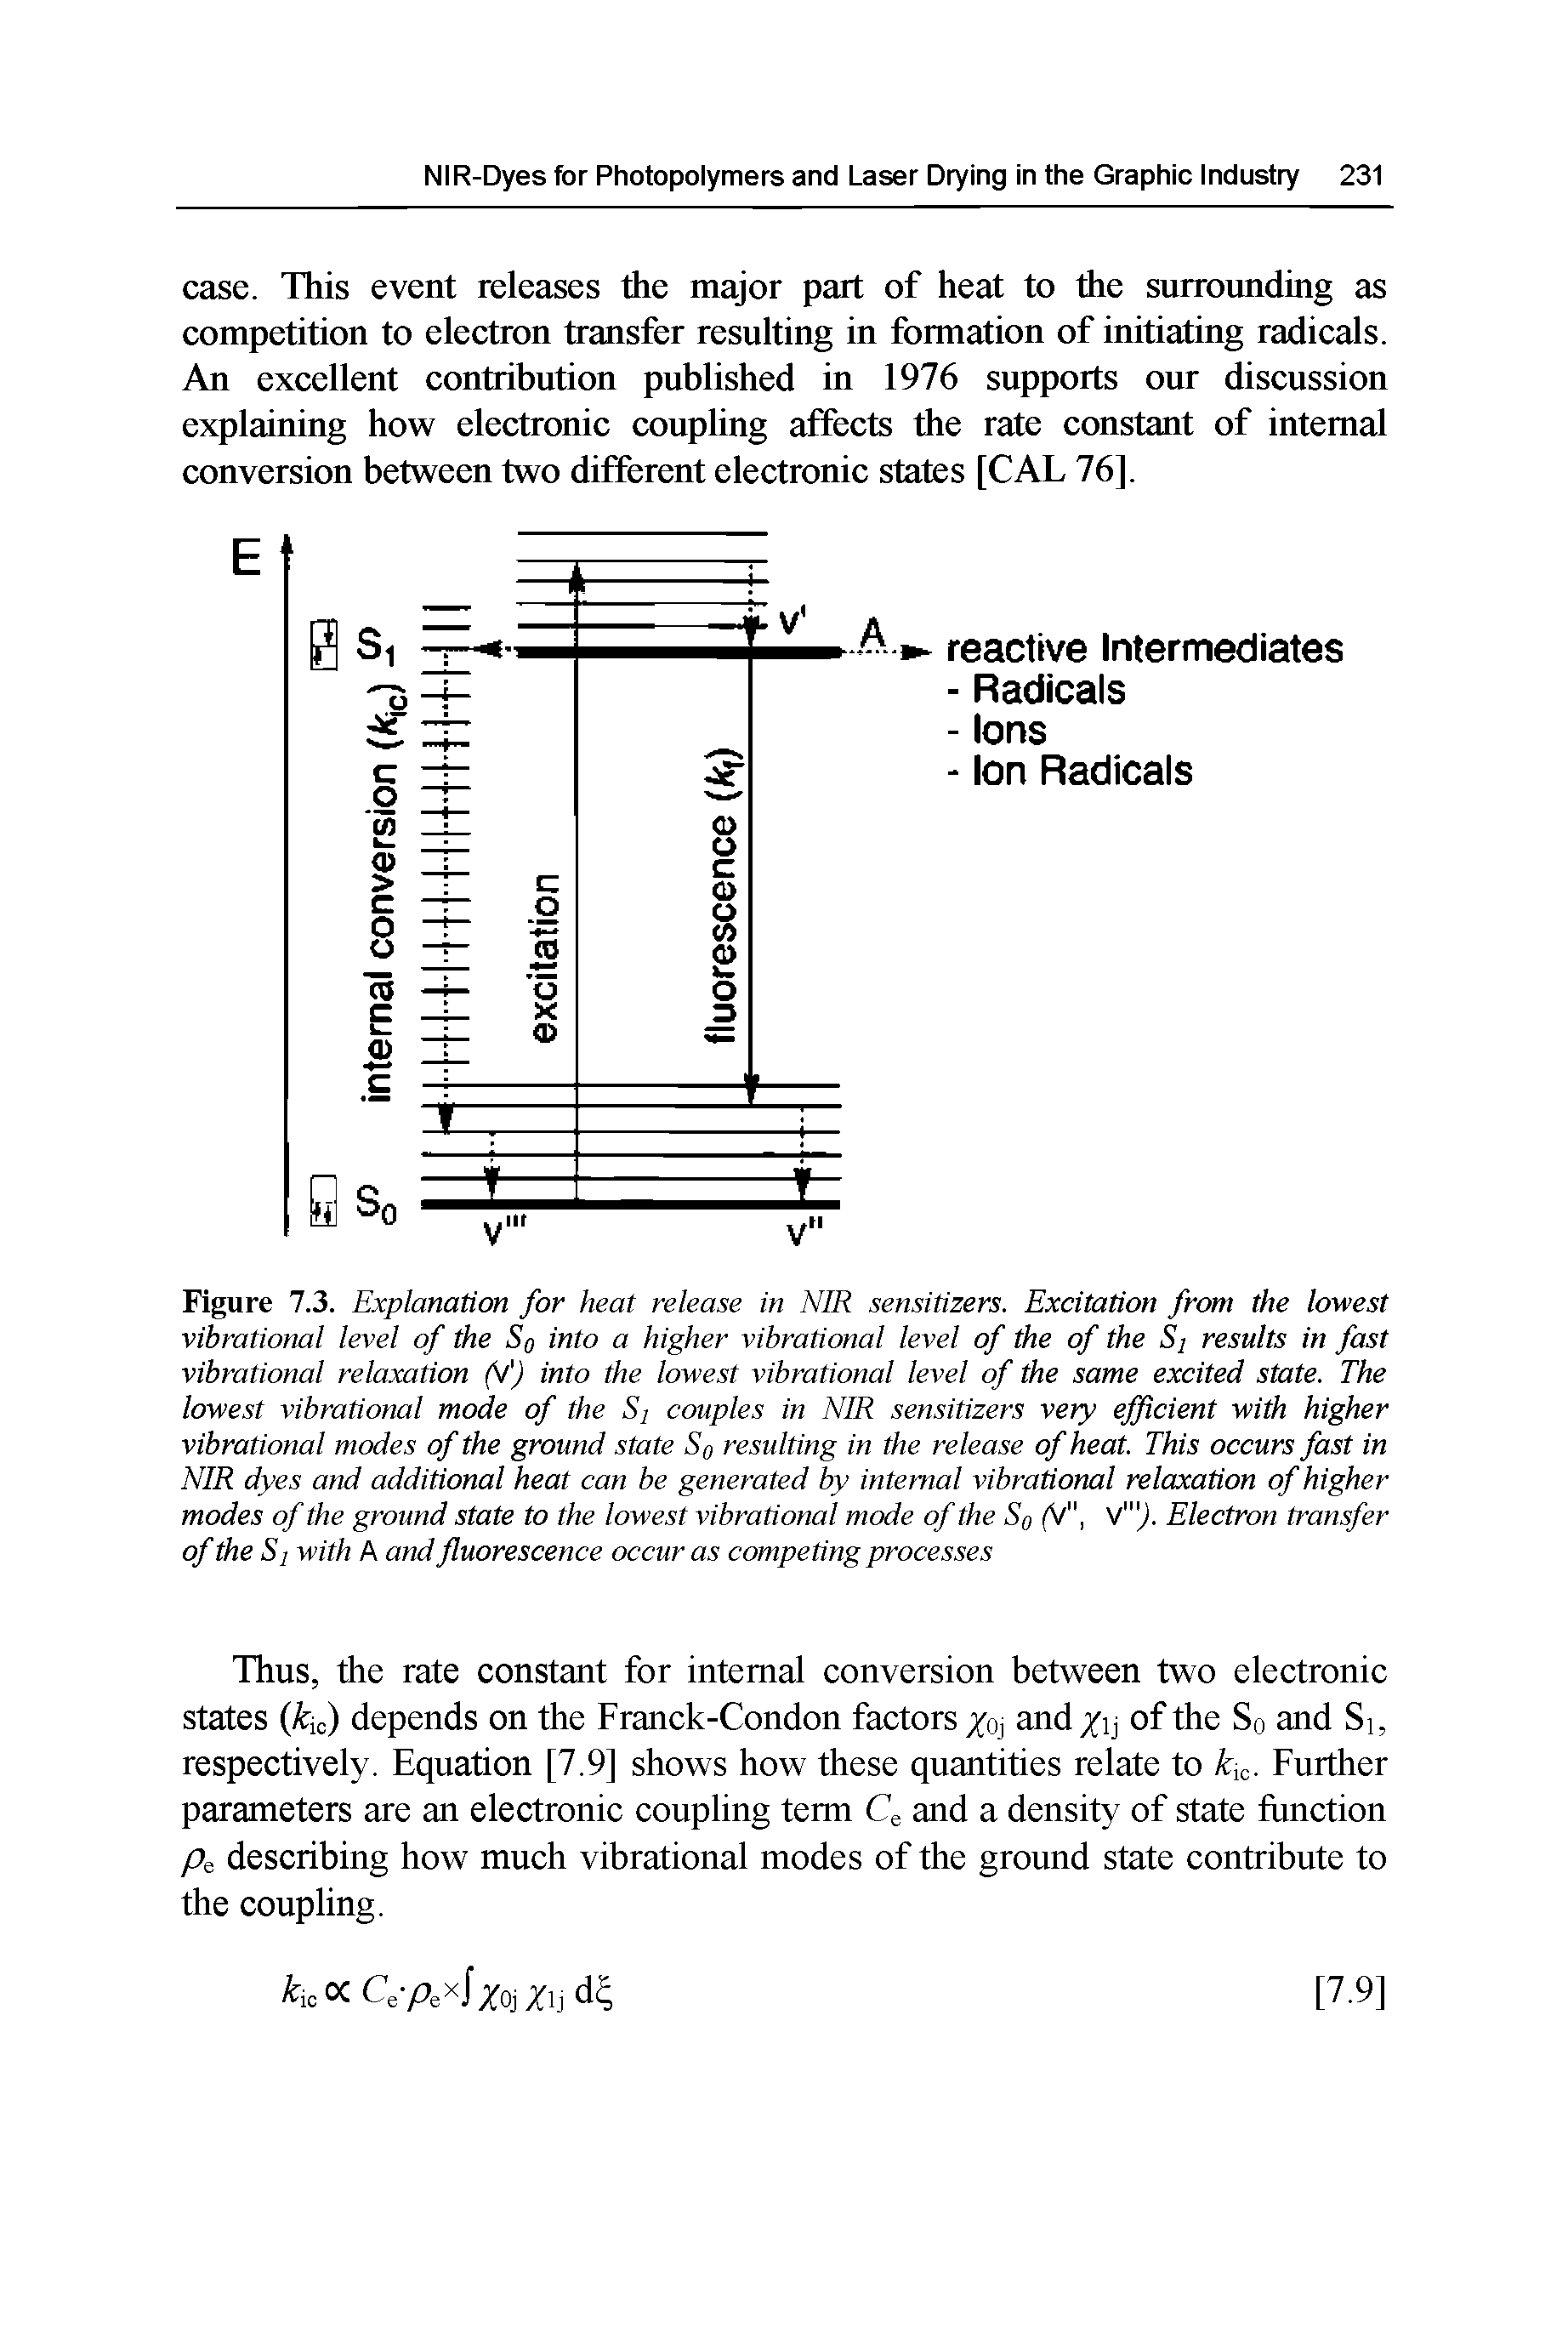 Figure 7.3. Explanation for heat release in NIR sensitizers. Excitation from the lowest vibrational level of the So into a higher vibrational level of the of the Si results in fast vibrational relaxation (VJ into the lowest vibrational level of the same excited state. The lowest vibrational mode of the Si couples in NIR sensitizers very efficient with higher vibrational modes of the ground state So resulting in the release of heat. This occurs fast in NIR dyes and additional heat can be generated by internal vibrational relaxation of higher modes of the ground state to the lowest vibrational mode of the Sg (V"i v". Electron transfer of the Si with A and fluorescence occur as competing processes...